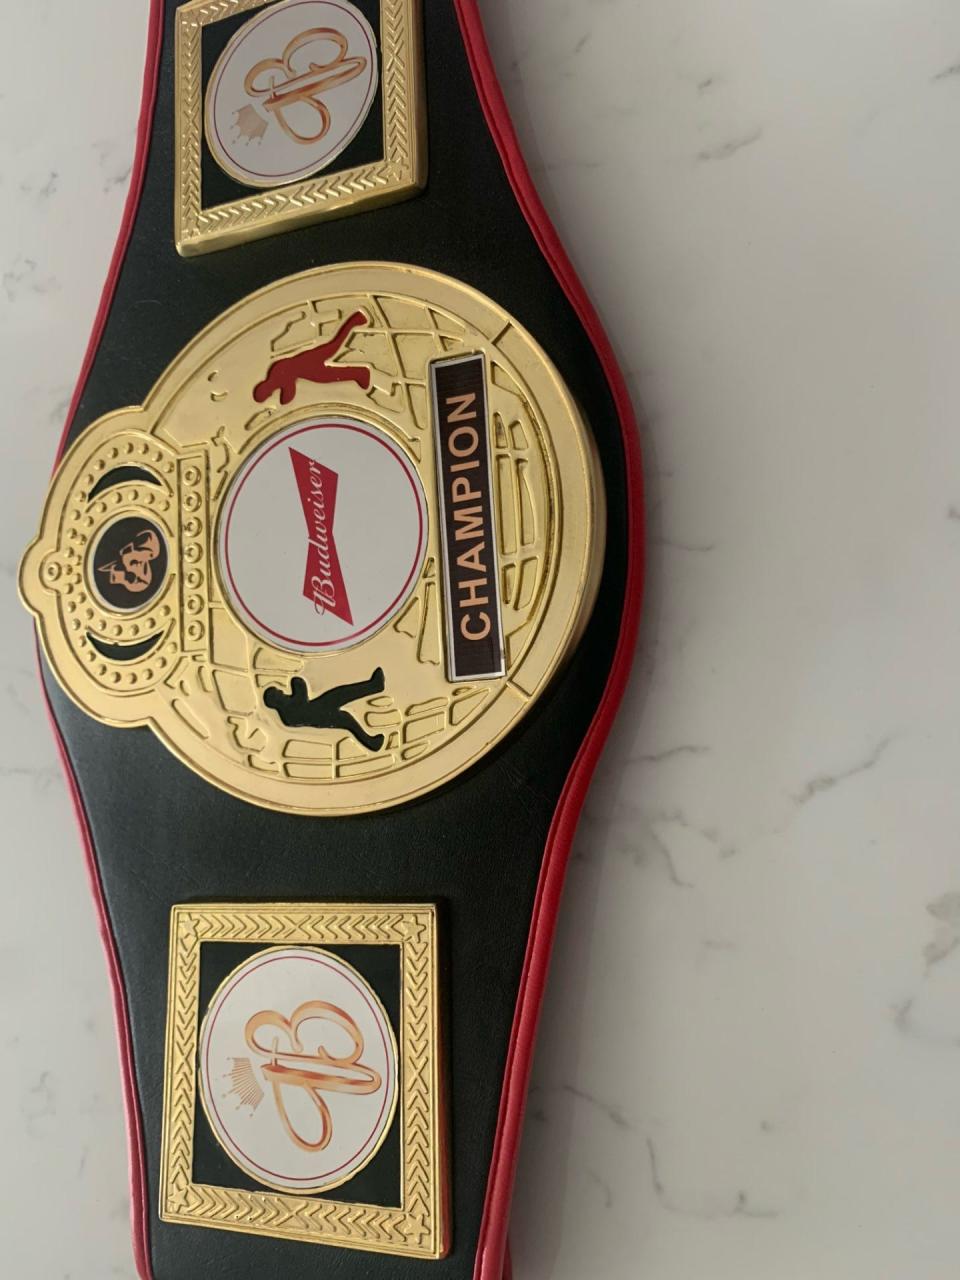 A look at the belt to be awarded to the winners.